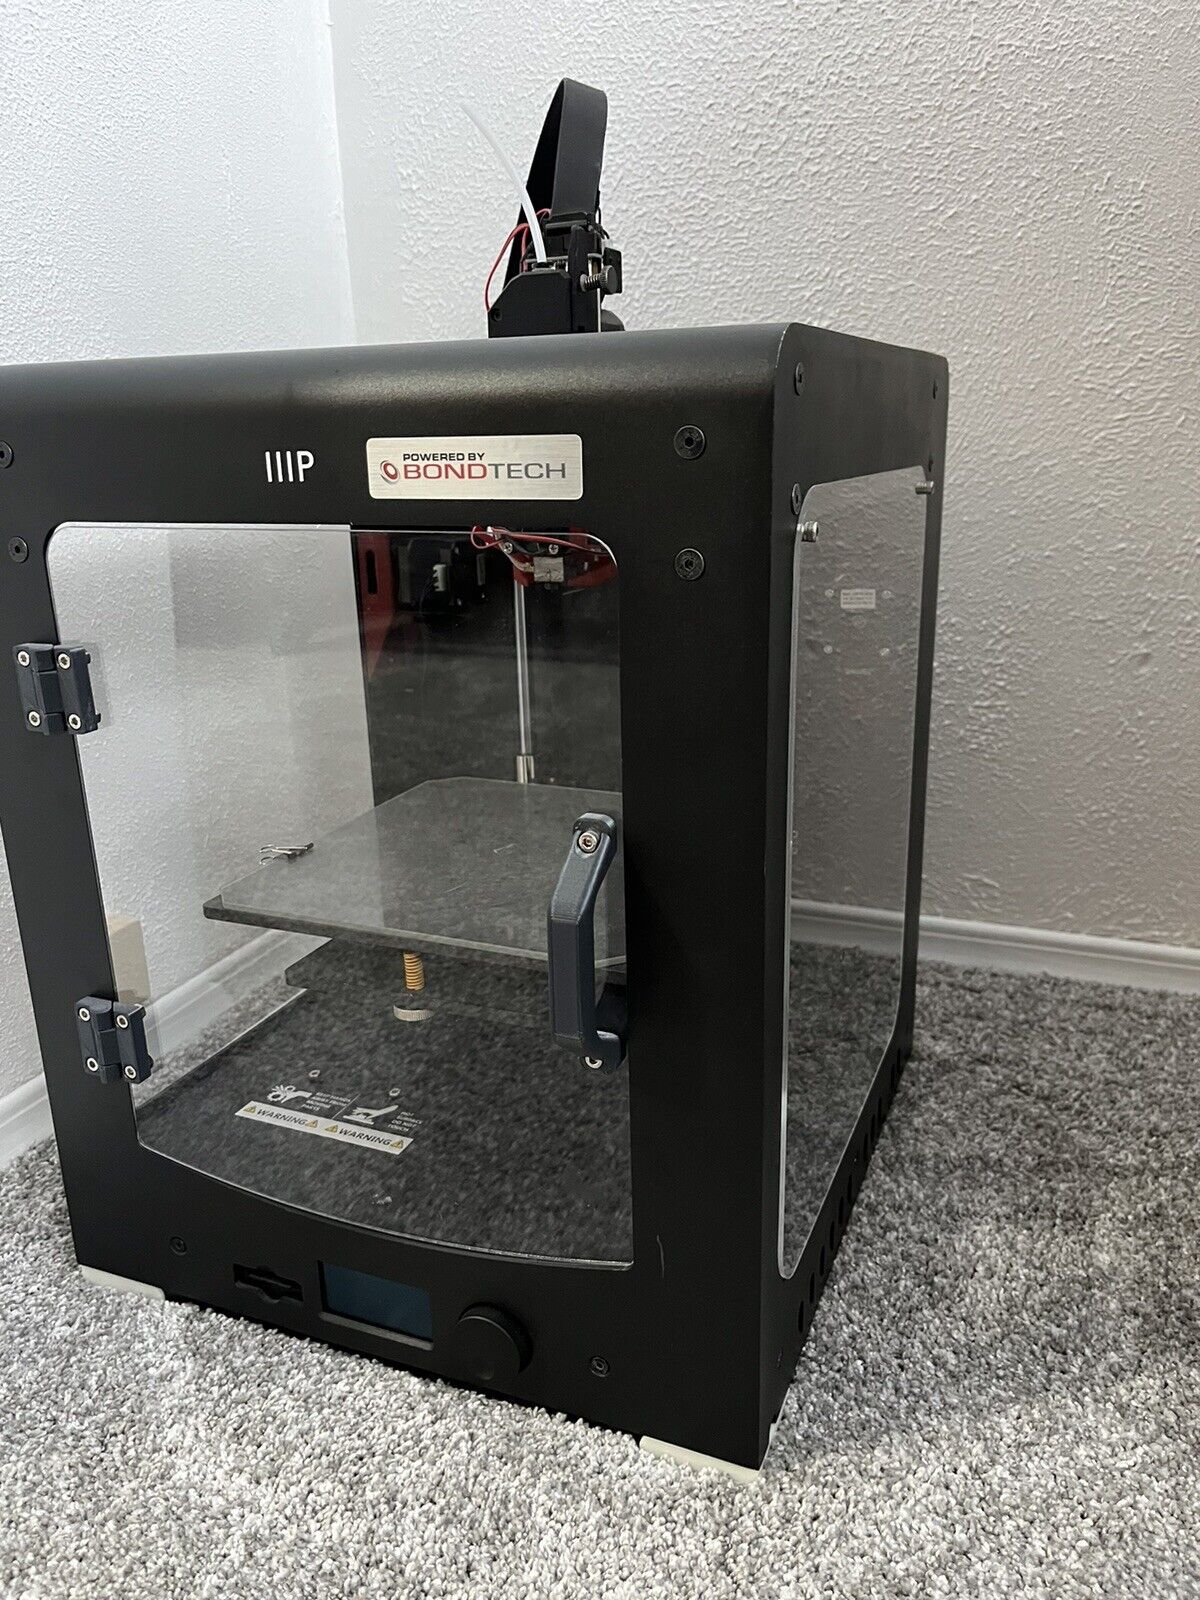 USED Monoprice 15710 Ultimate 3D Printer/Wanhao Duplicator 6 With Upgrades